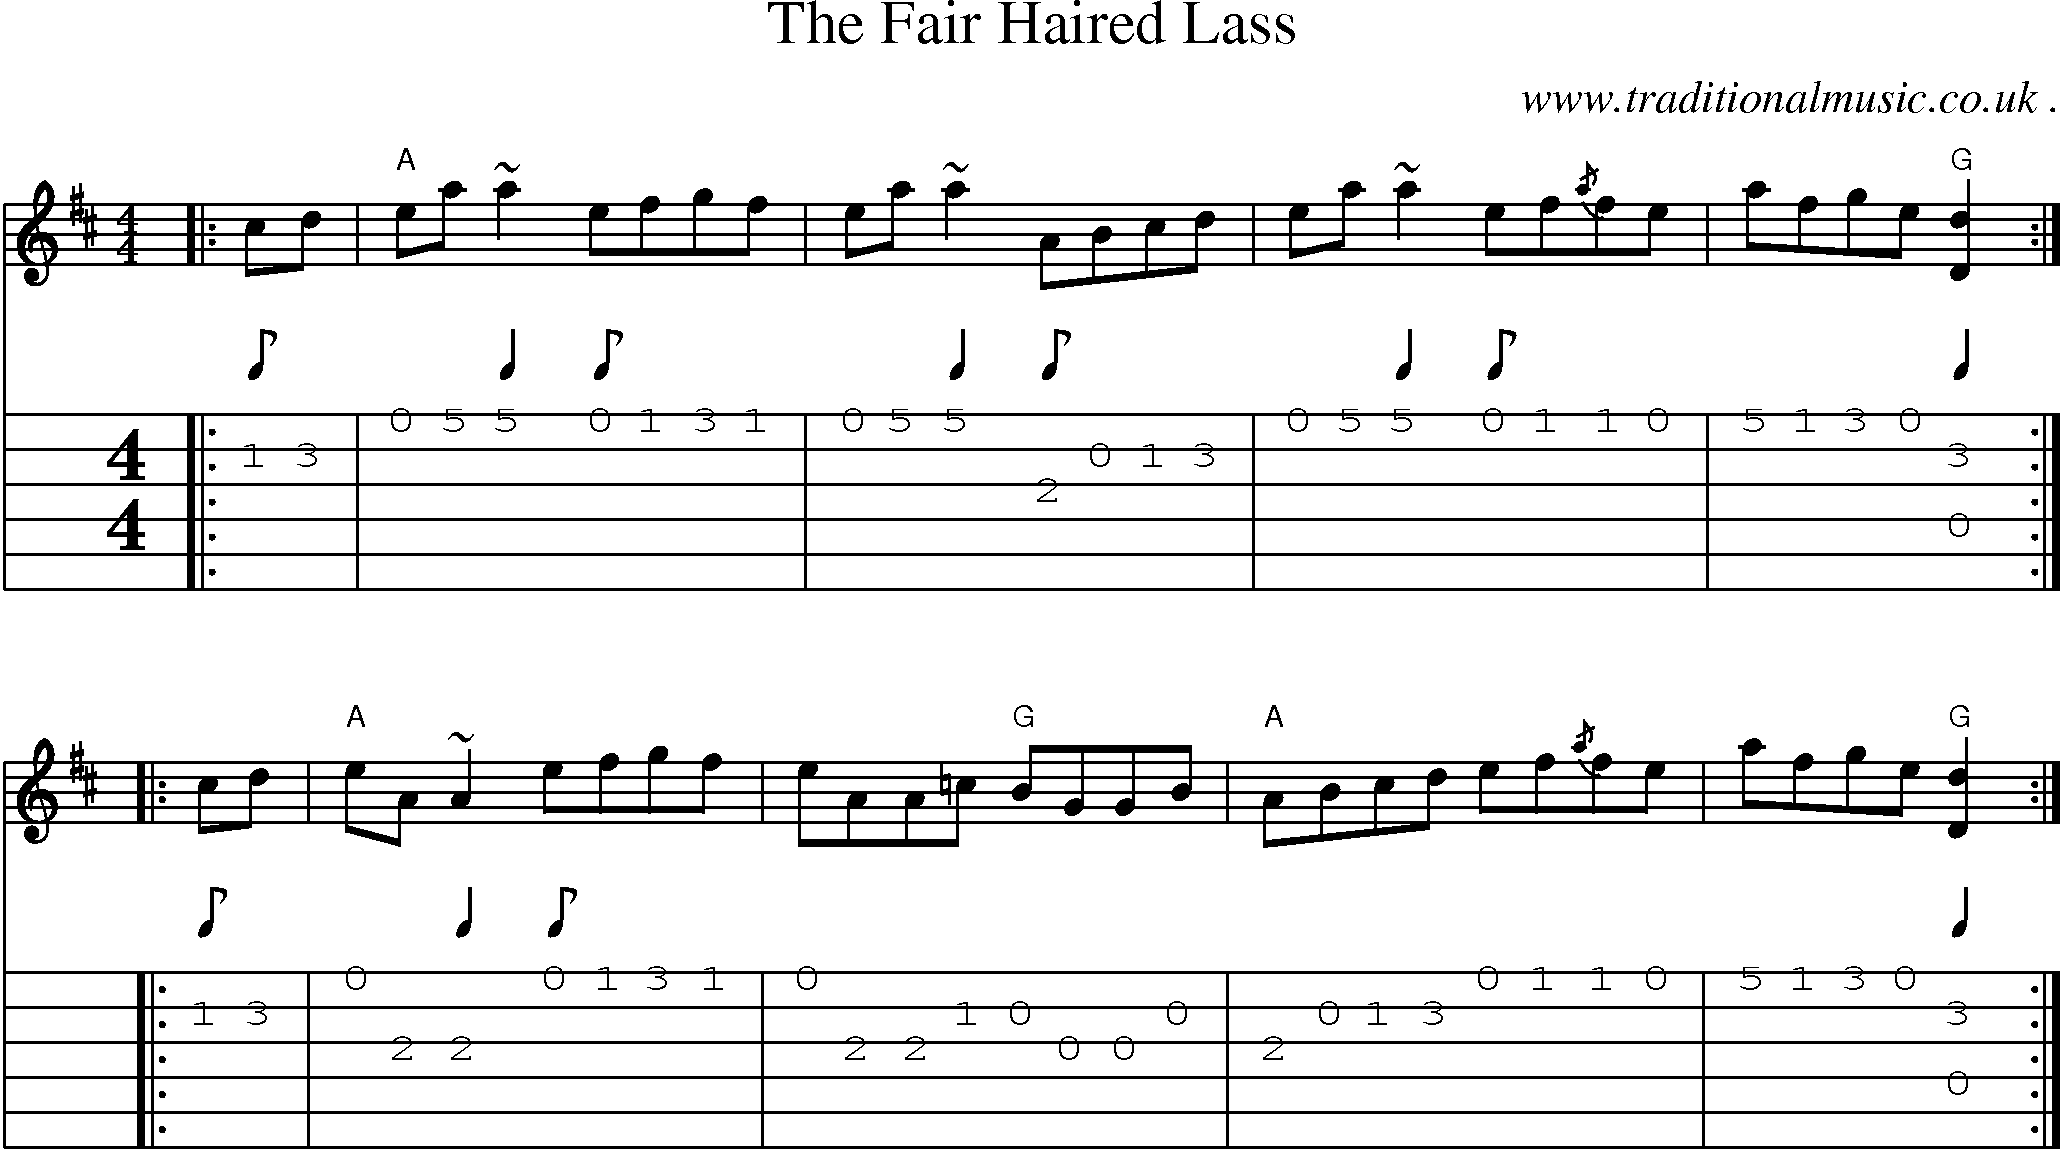 Sheet-music  score, Chords and Guitar Tabs for The Fair Haired Lass